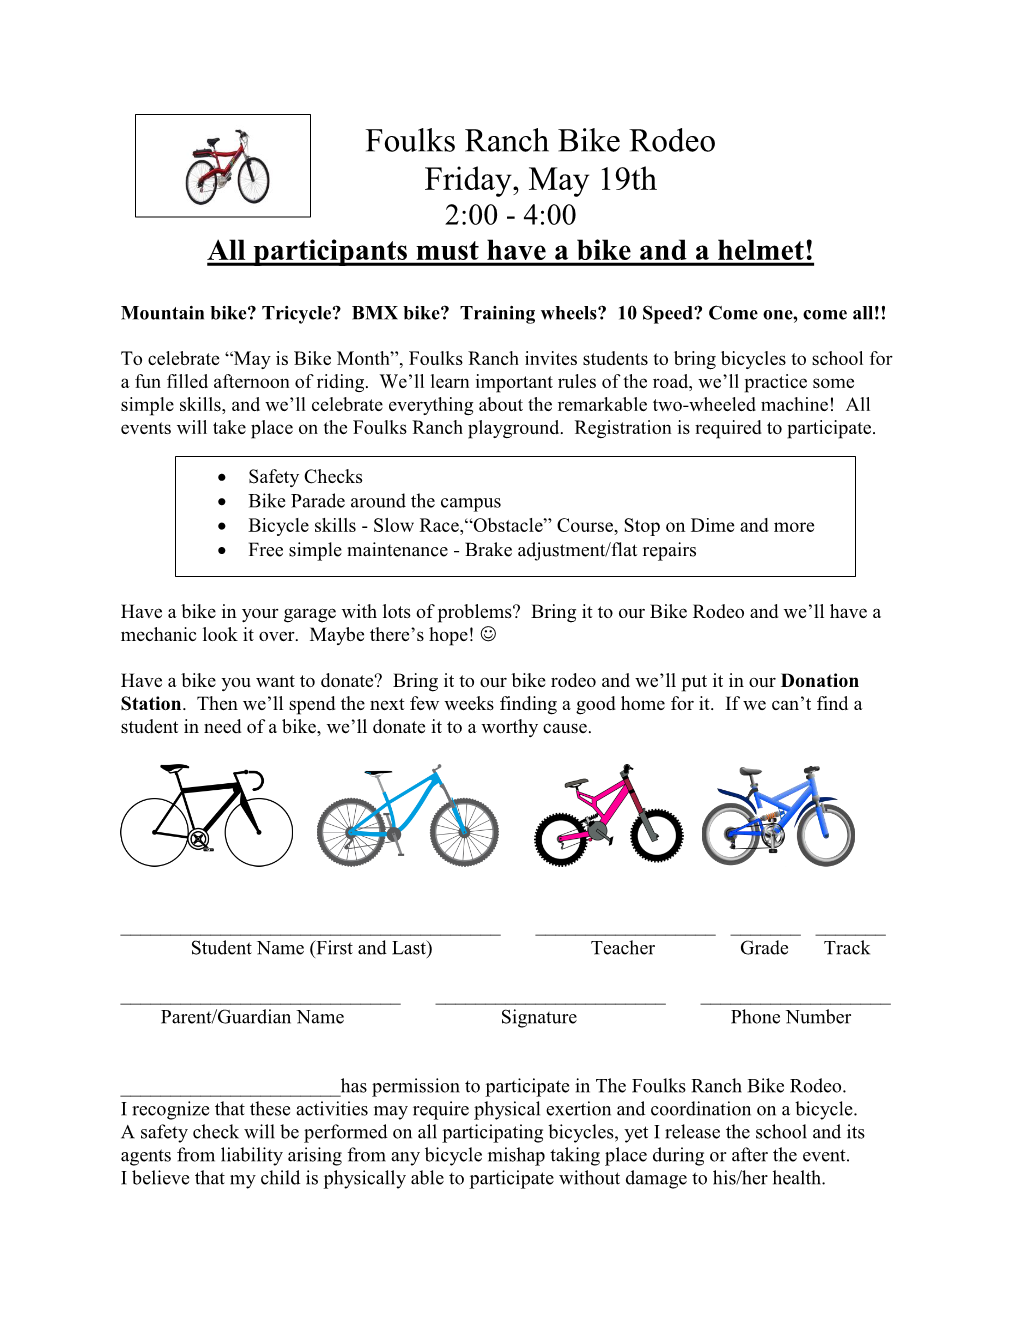 Foulks Ranch Bike Rodeo Friday, May 19Th 2:00 - 4:00 All Participants Must Have a Bike and a Helmet!